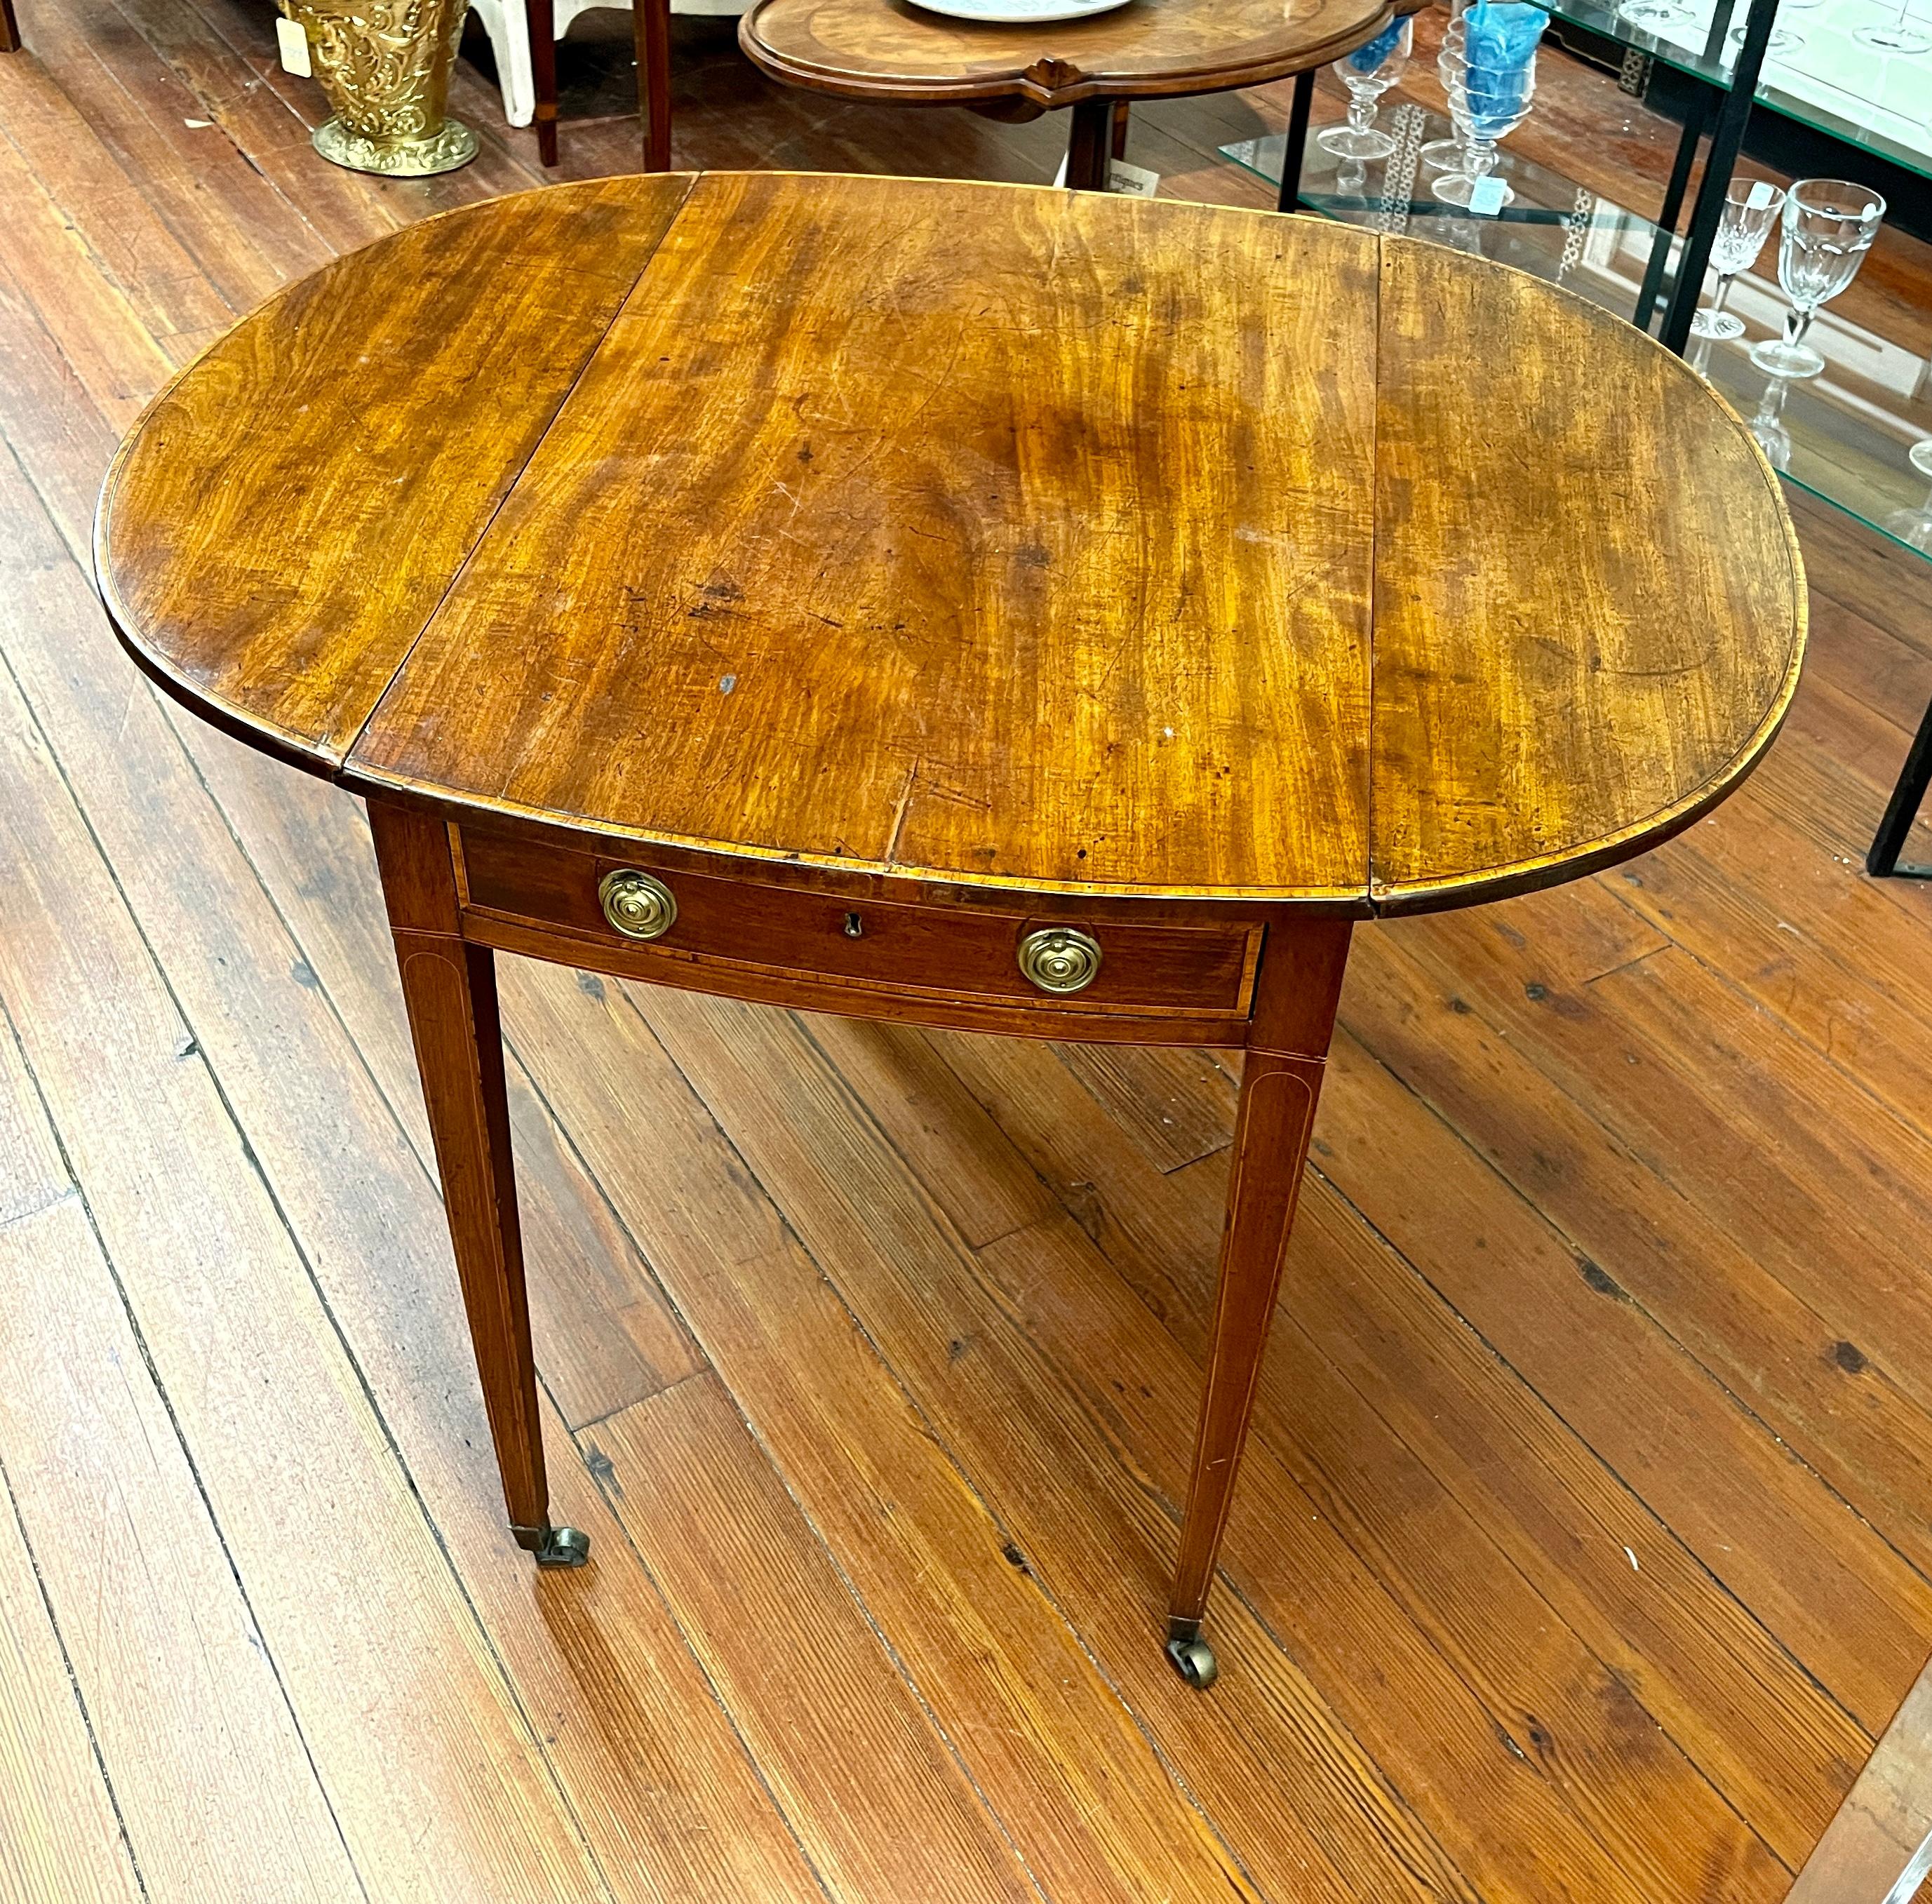 Fine antique English period George III inlaid mahogany oval drop-leaf Pembroke table. 
Please note: this item has original brasses intact, with lovely and delicate proportions, and wonderful patina and color. 
Table retains its original casters.